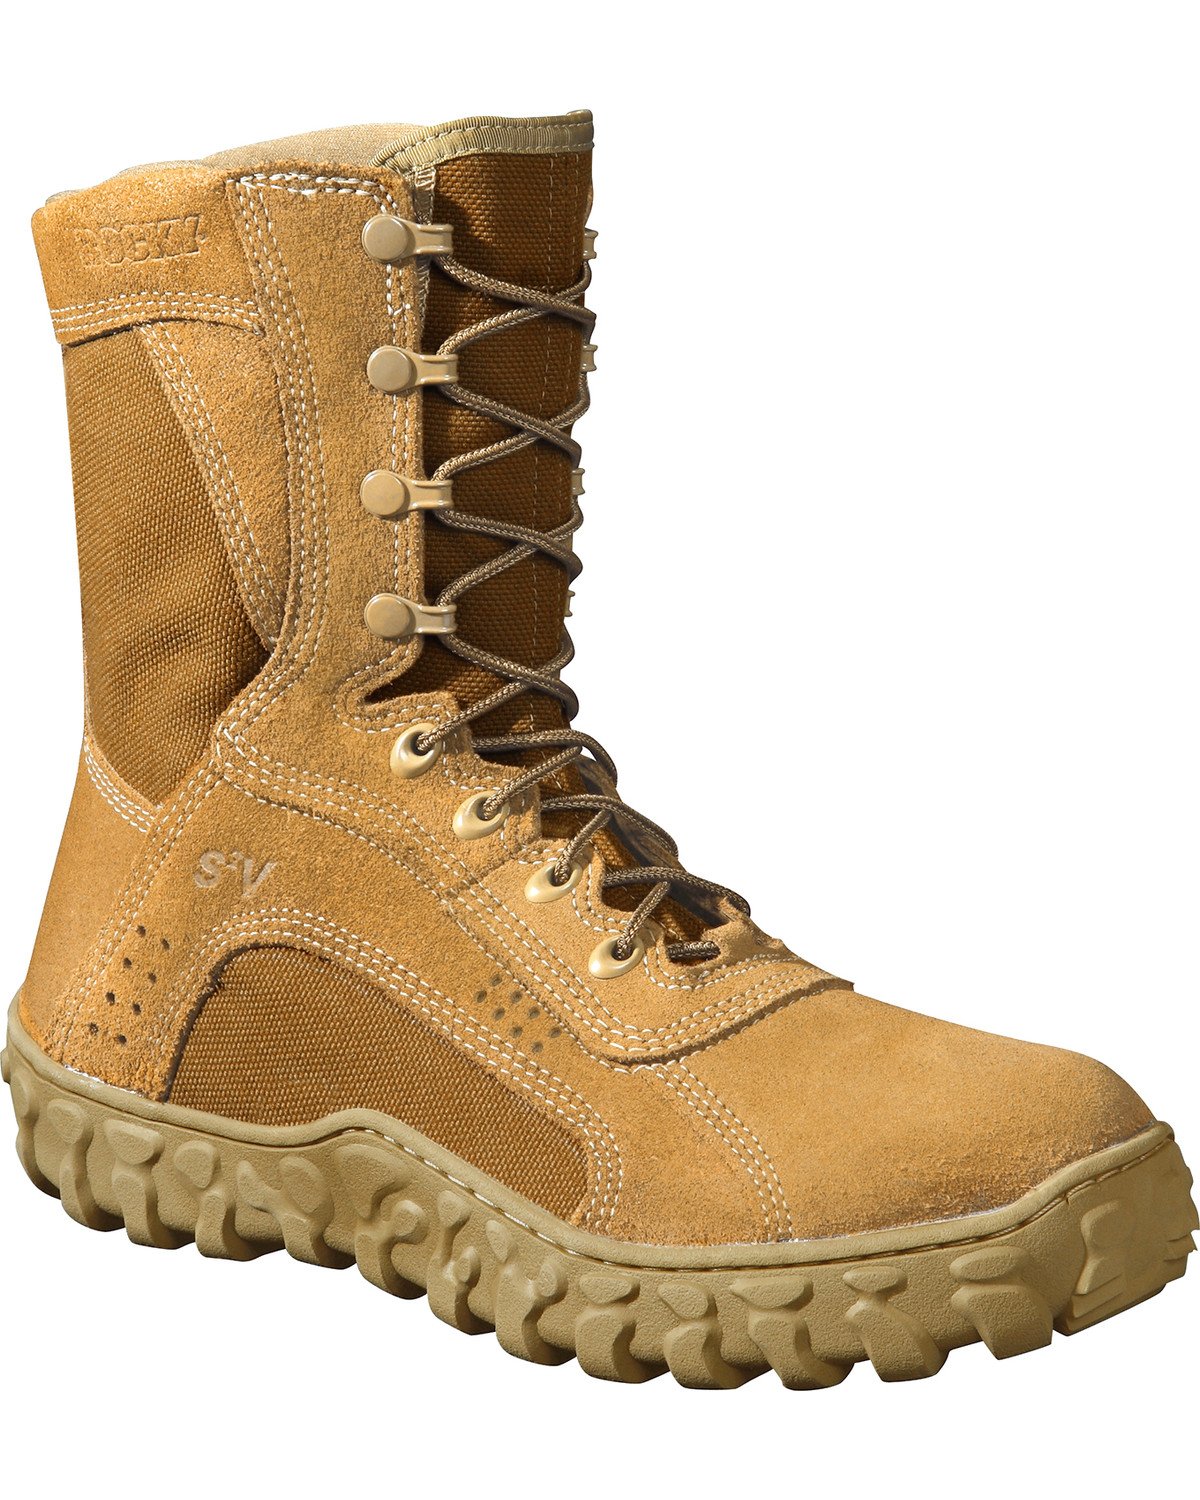 Rocky S2V Tactical Military Boots - Steel Toe